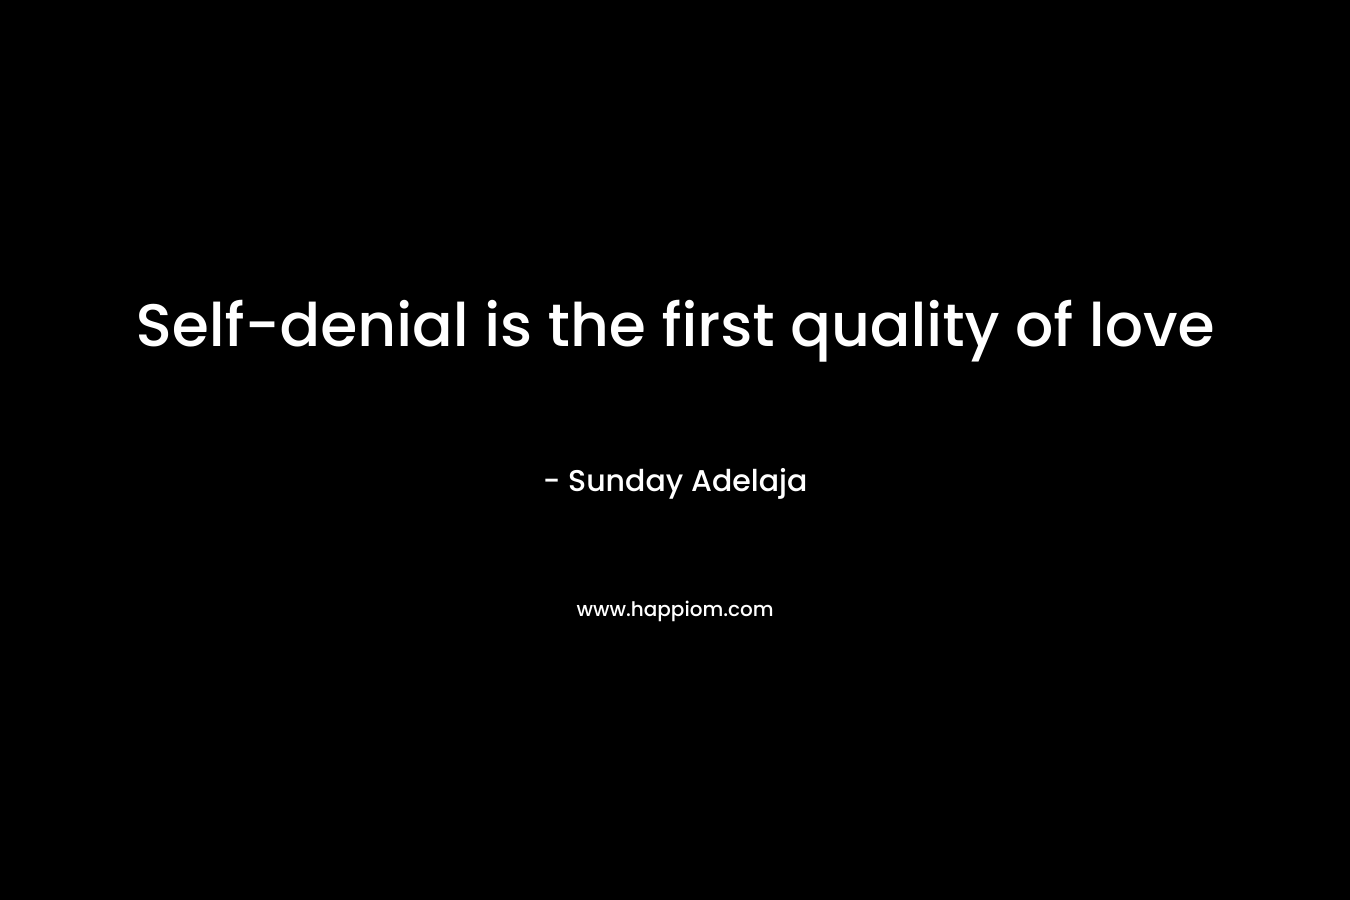 Self-denial is the first quality of love